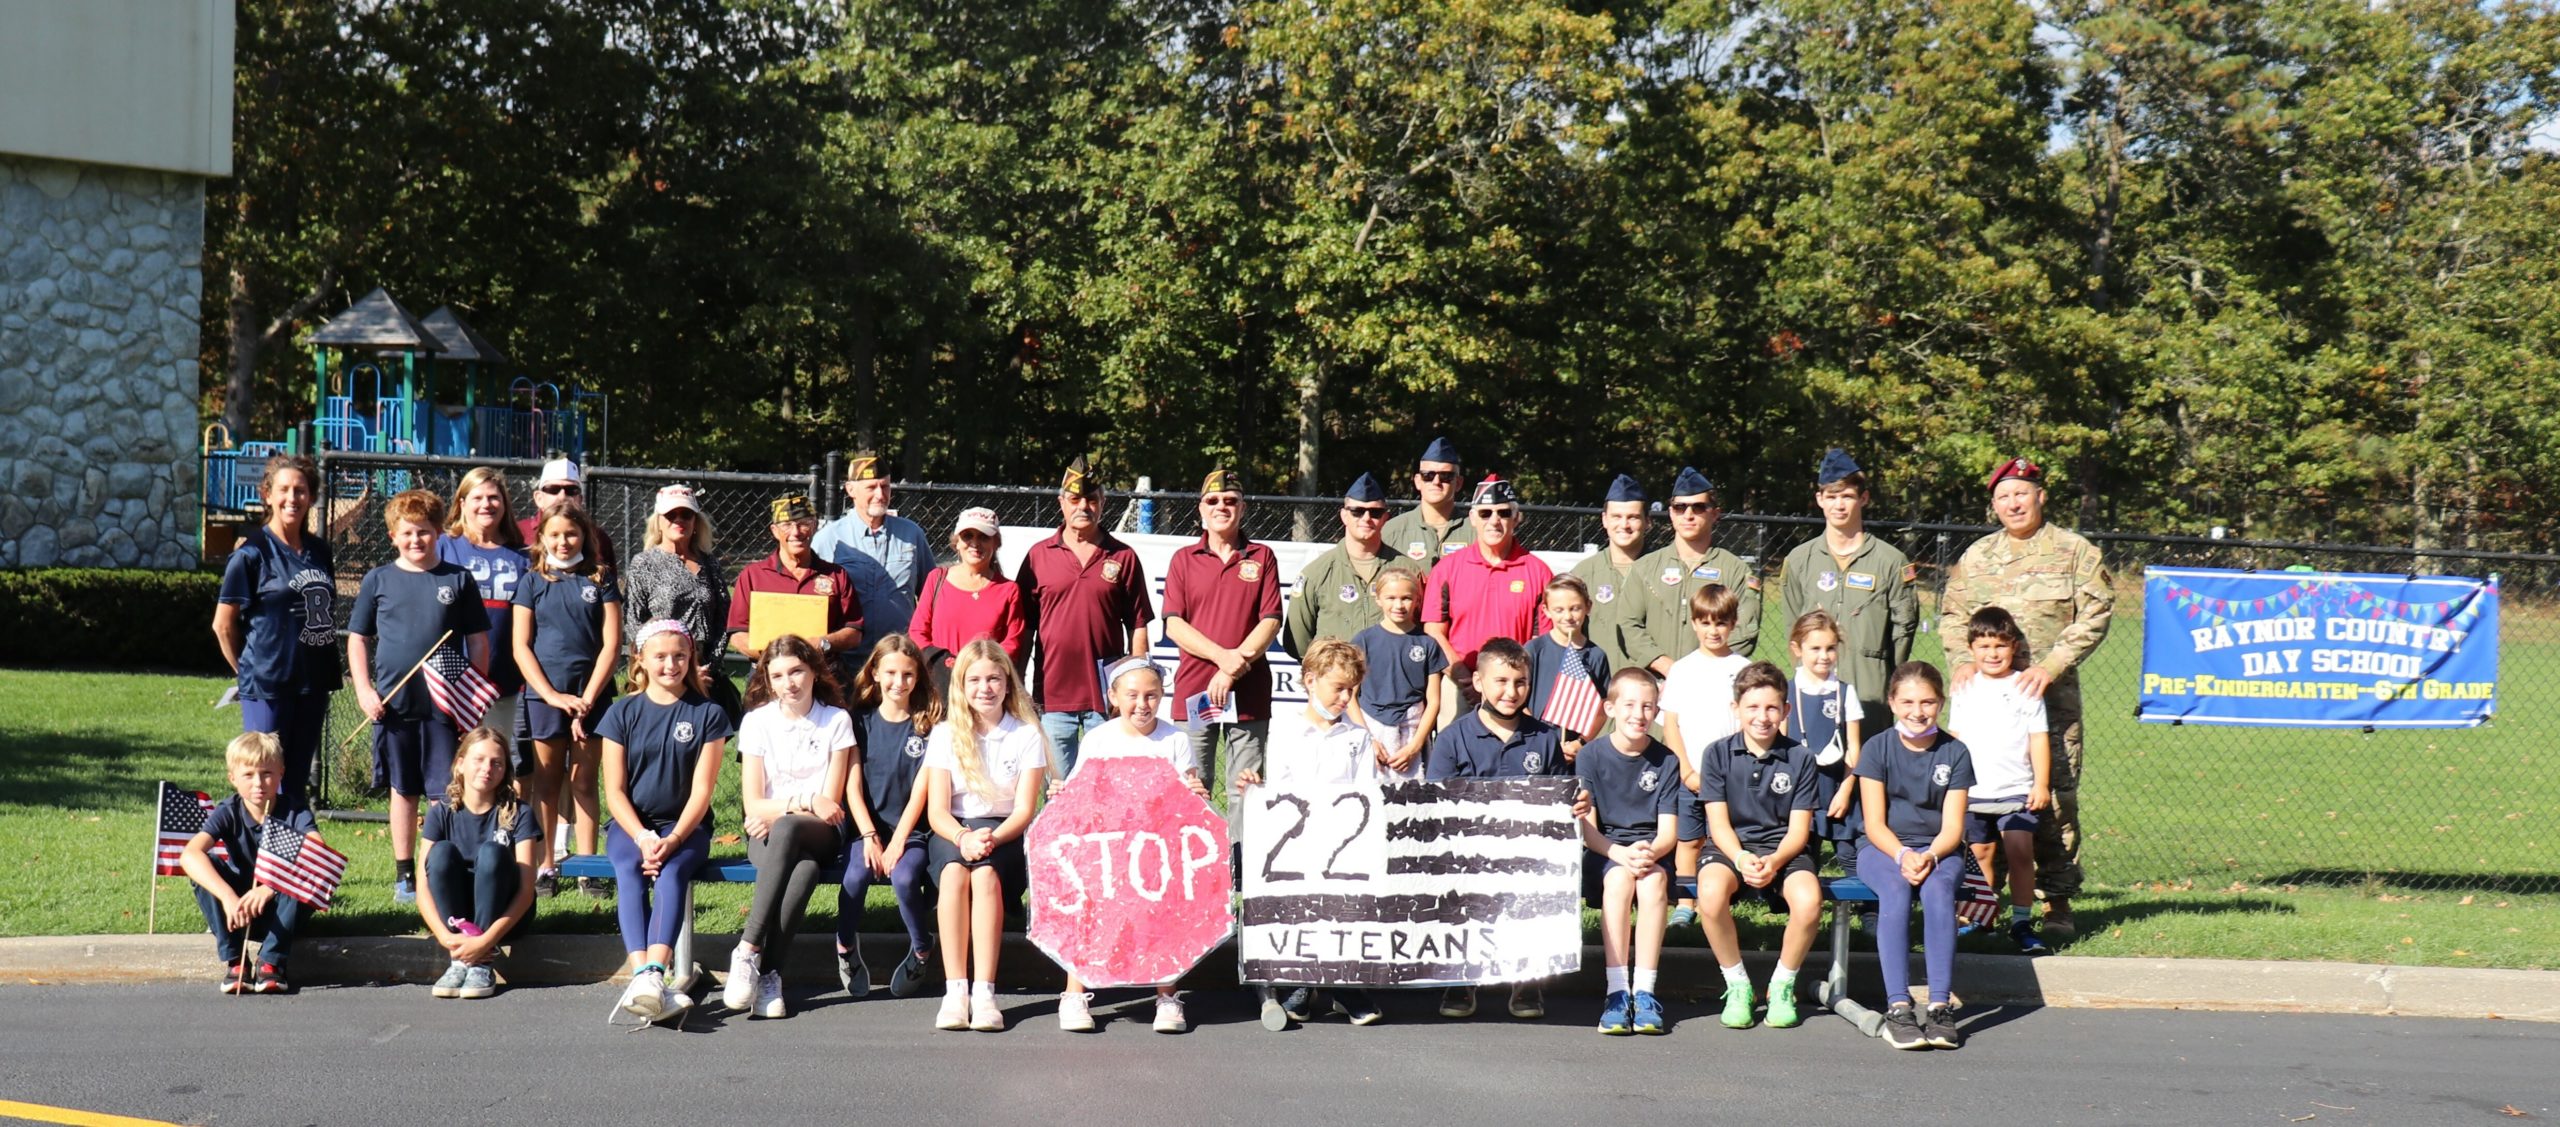 On October 22 VFW Post 5350 partnered with Raynor Country Day School staff, students, parents, military members and veterans to highlight and support the VFW STOP 22 program which aims to bring awareness to and help eliminate the deaths by suicide that have been occurring in our military and veteran population.  A total of 200 supporters all walked for 22 minutes on the Raynor campus and contributed monetarily to the STOP22 program.